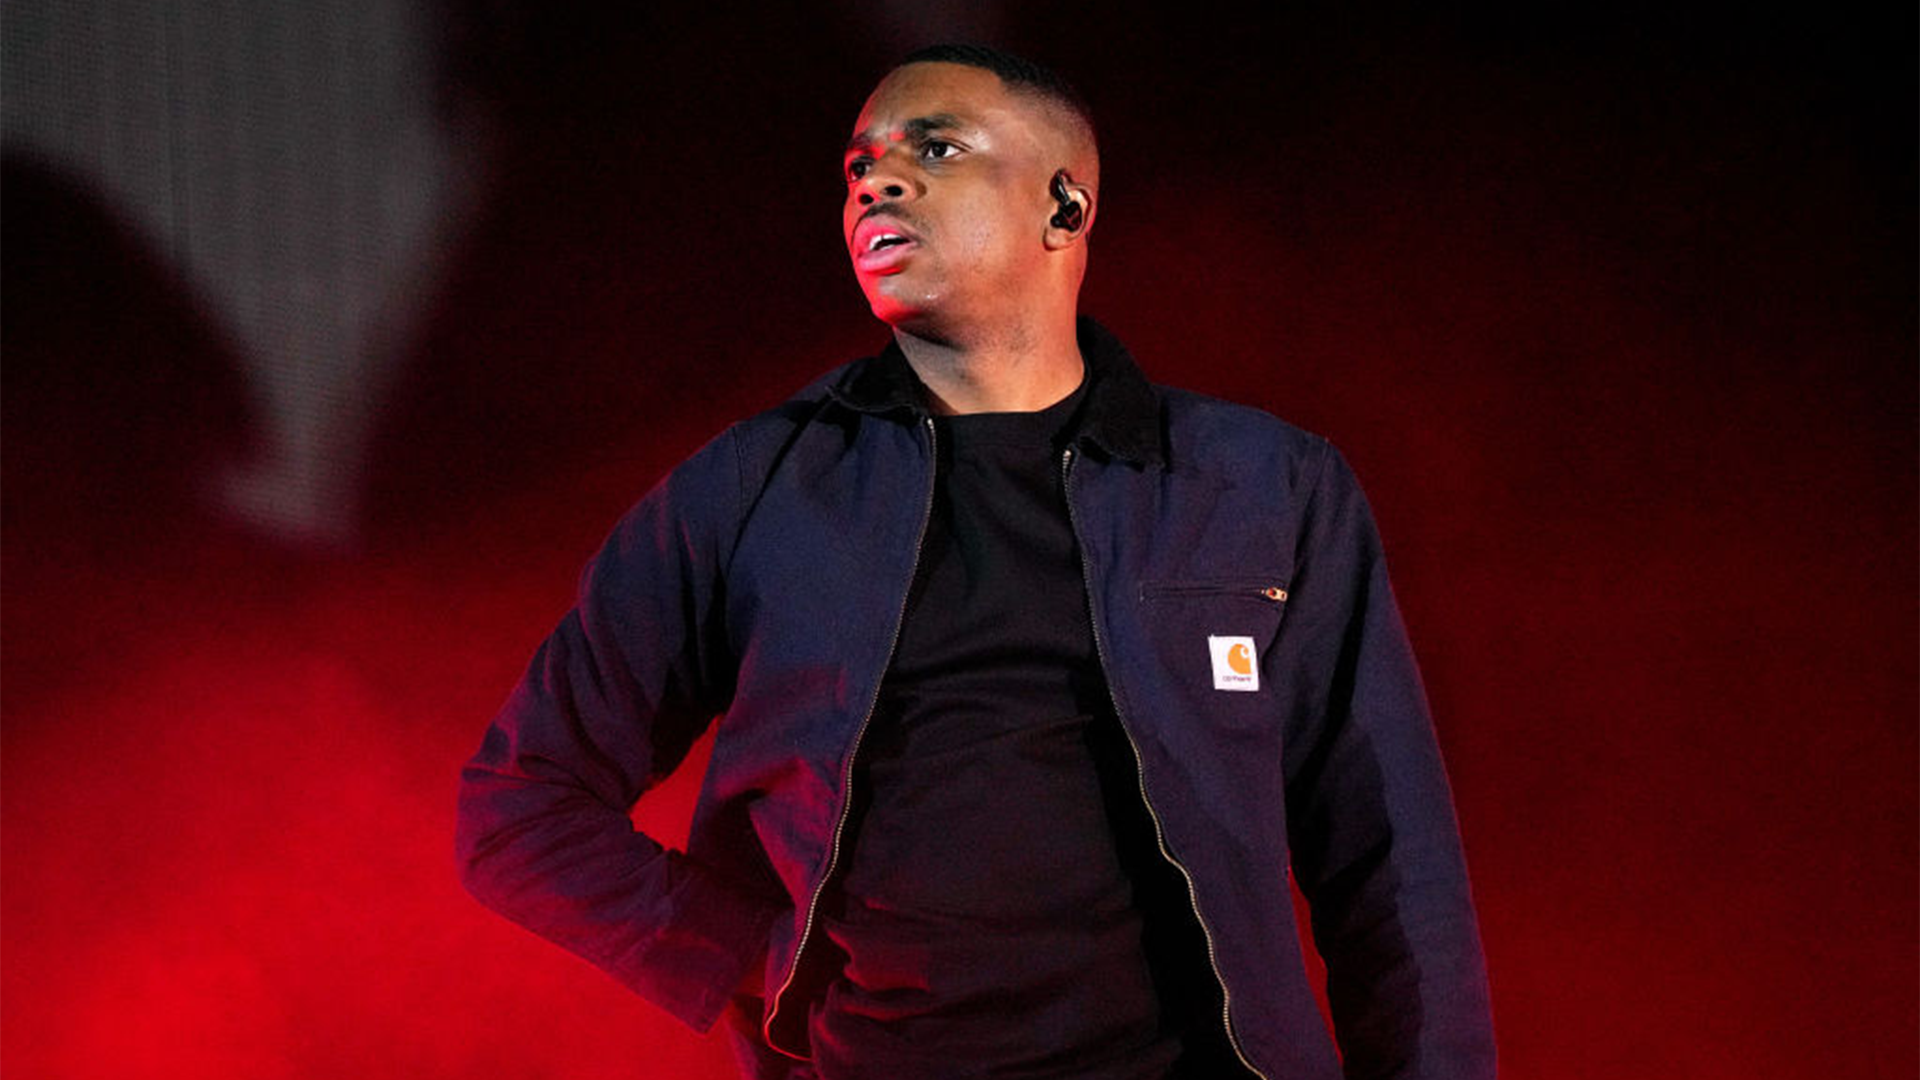 Vince Staples Says A Song He Once Made For 'Call of Duty' Was 'Way More' Than His Album Budget, And It Wasn't Even Used